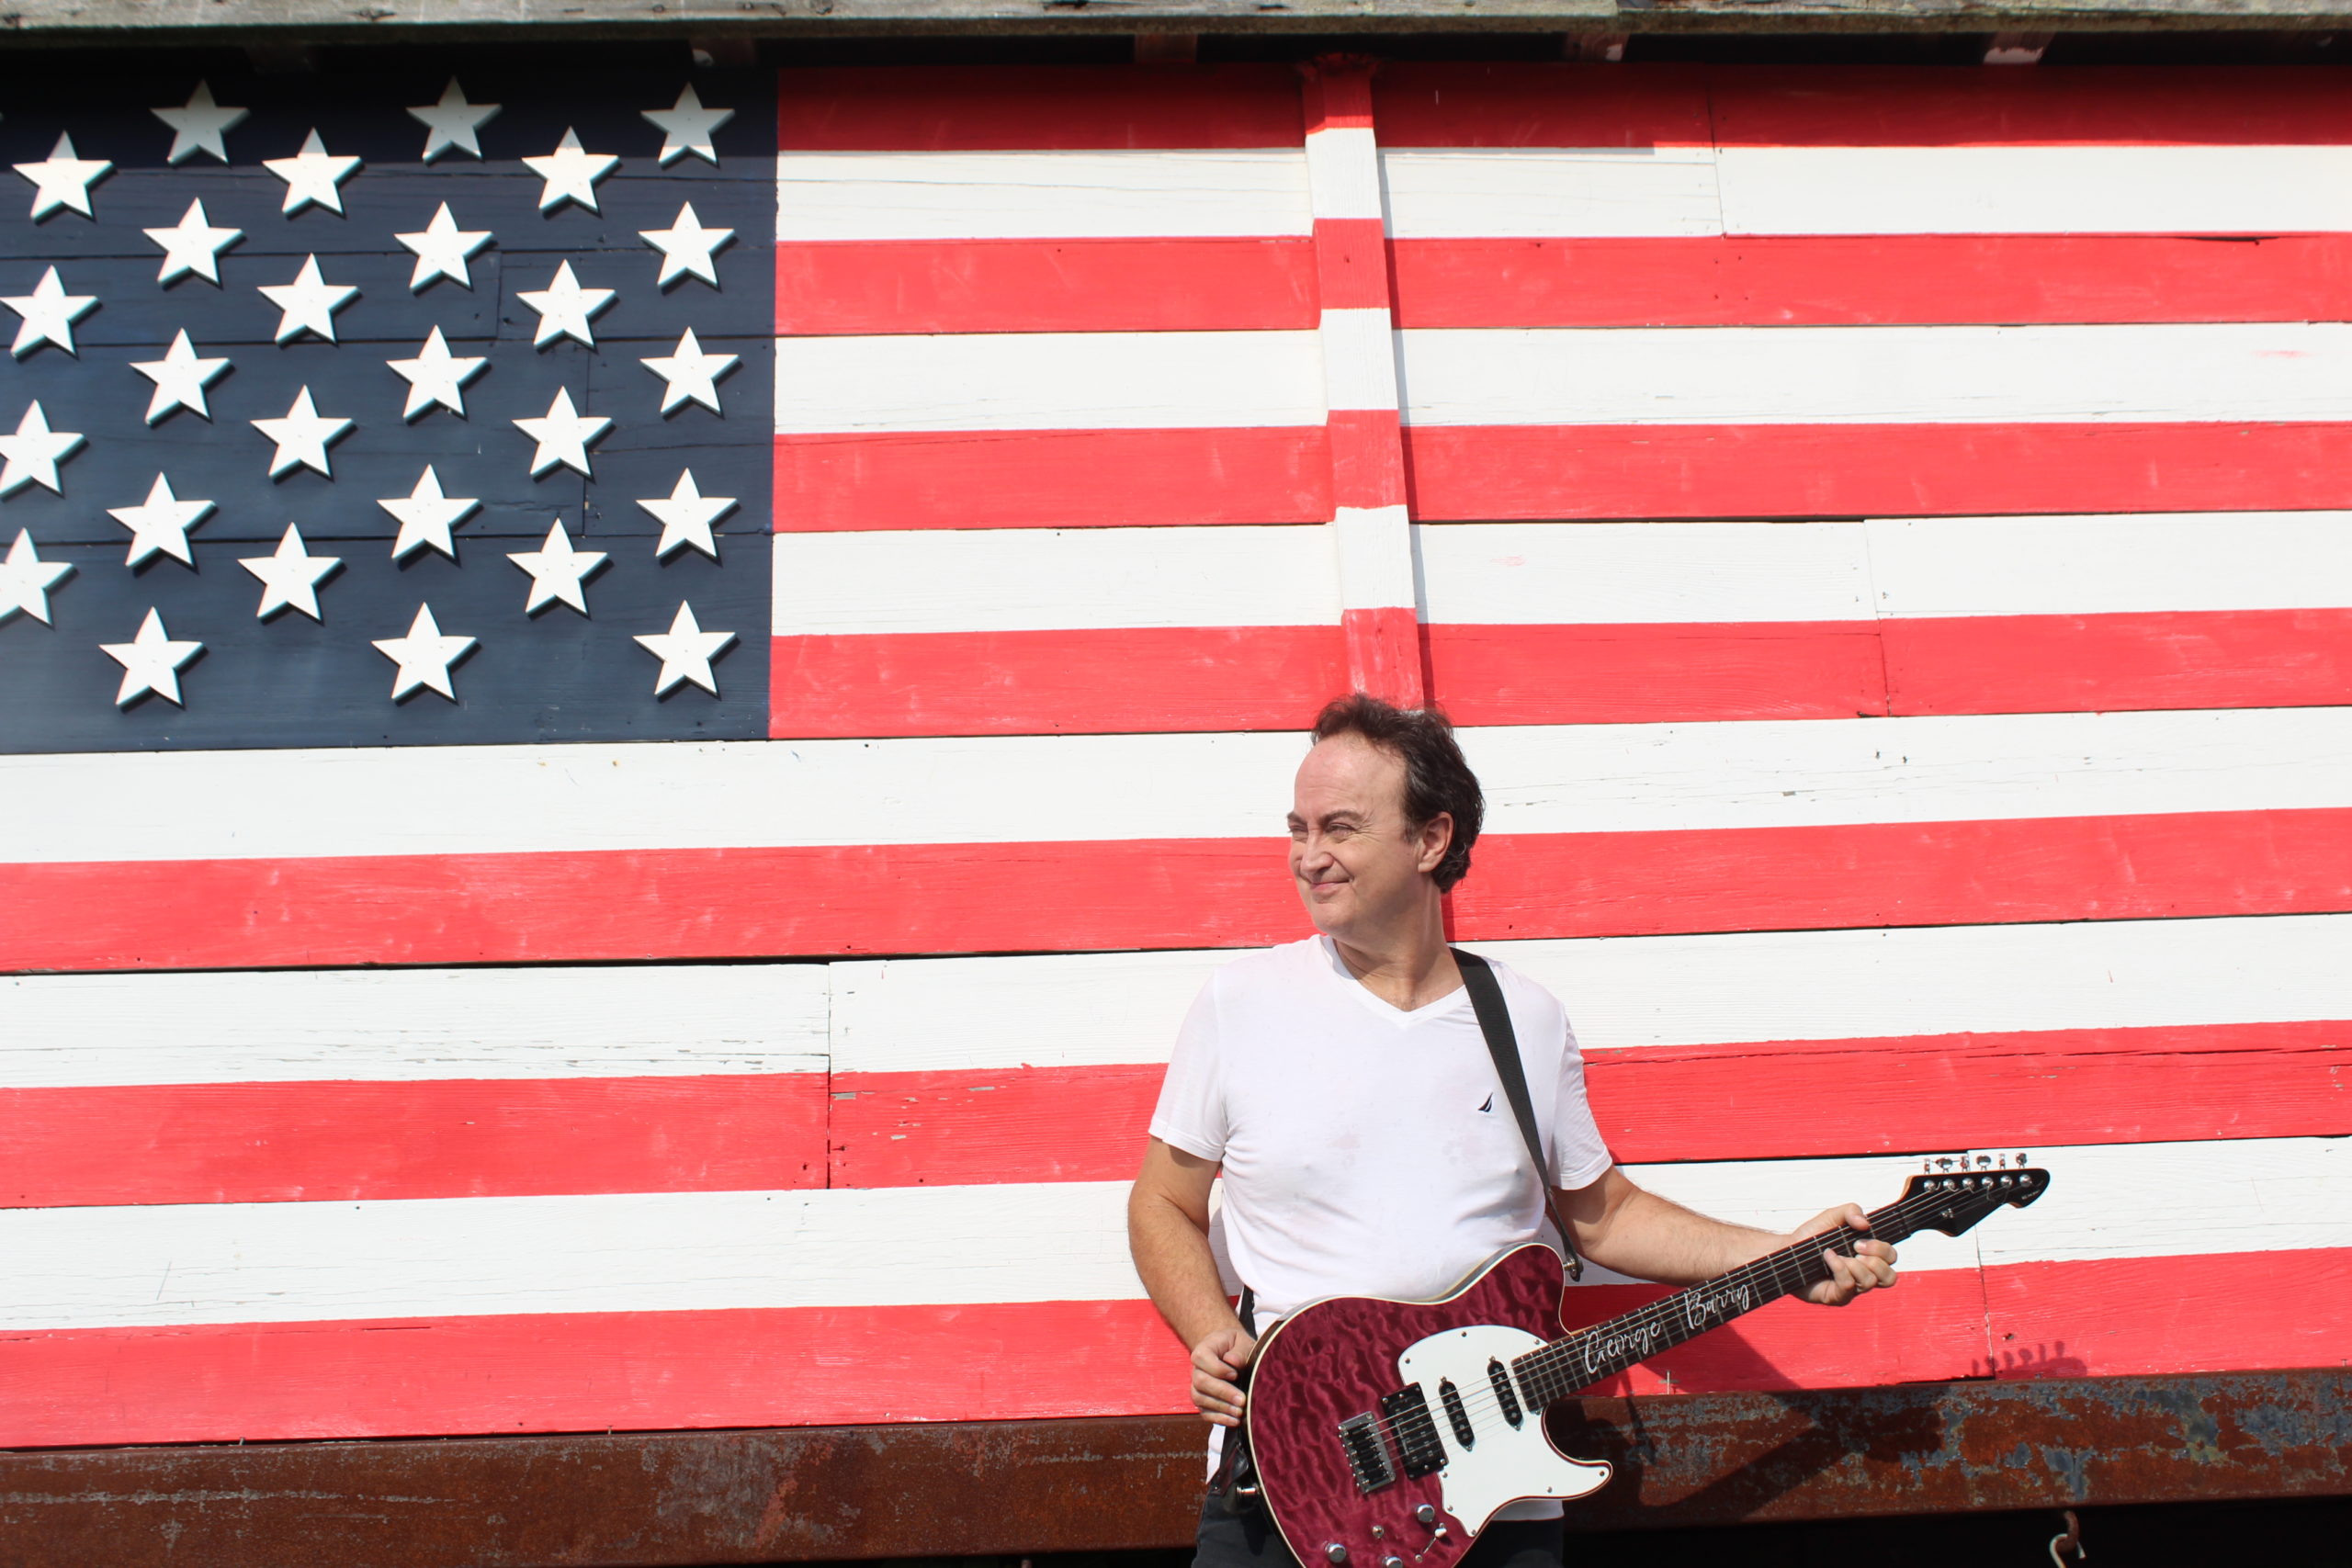 This is a picture of Geroge A. Barry with his elecric guitar in front of the american flag